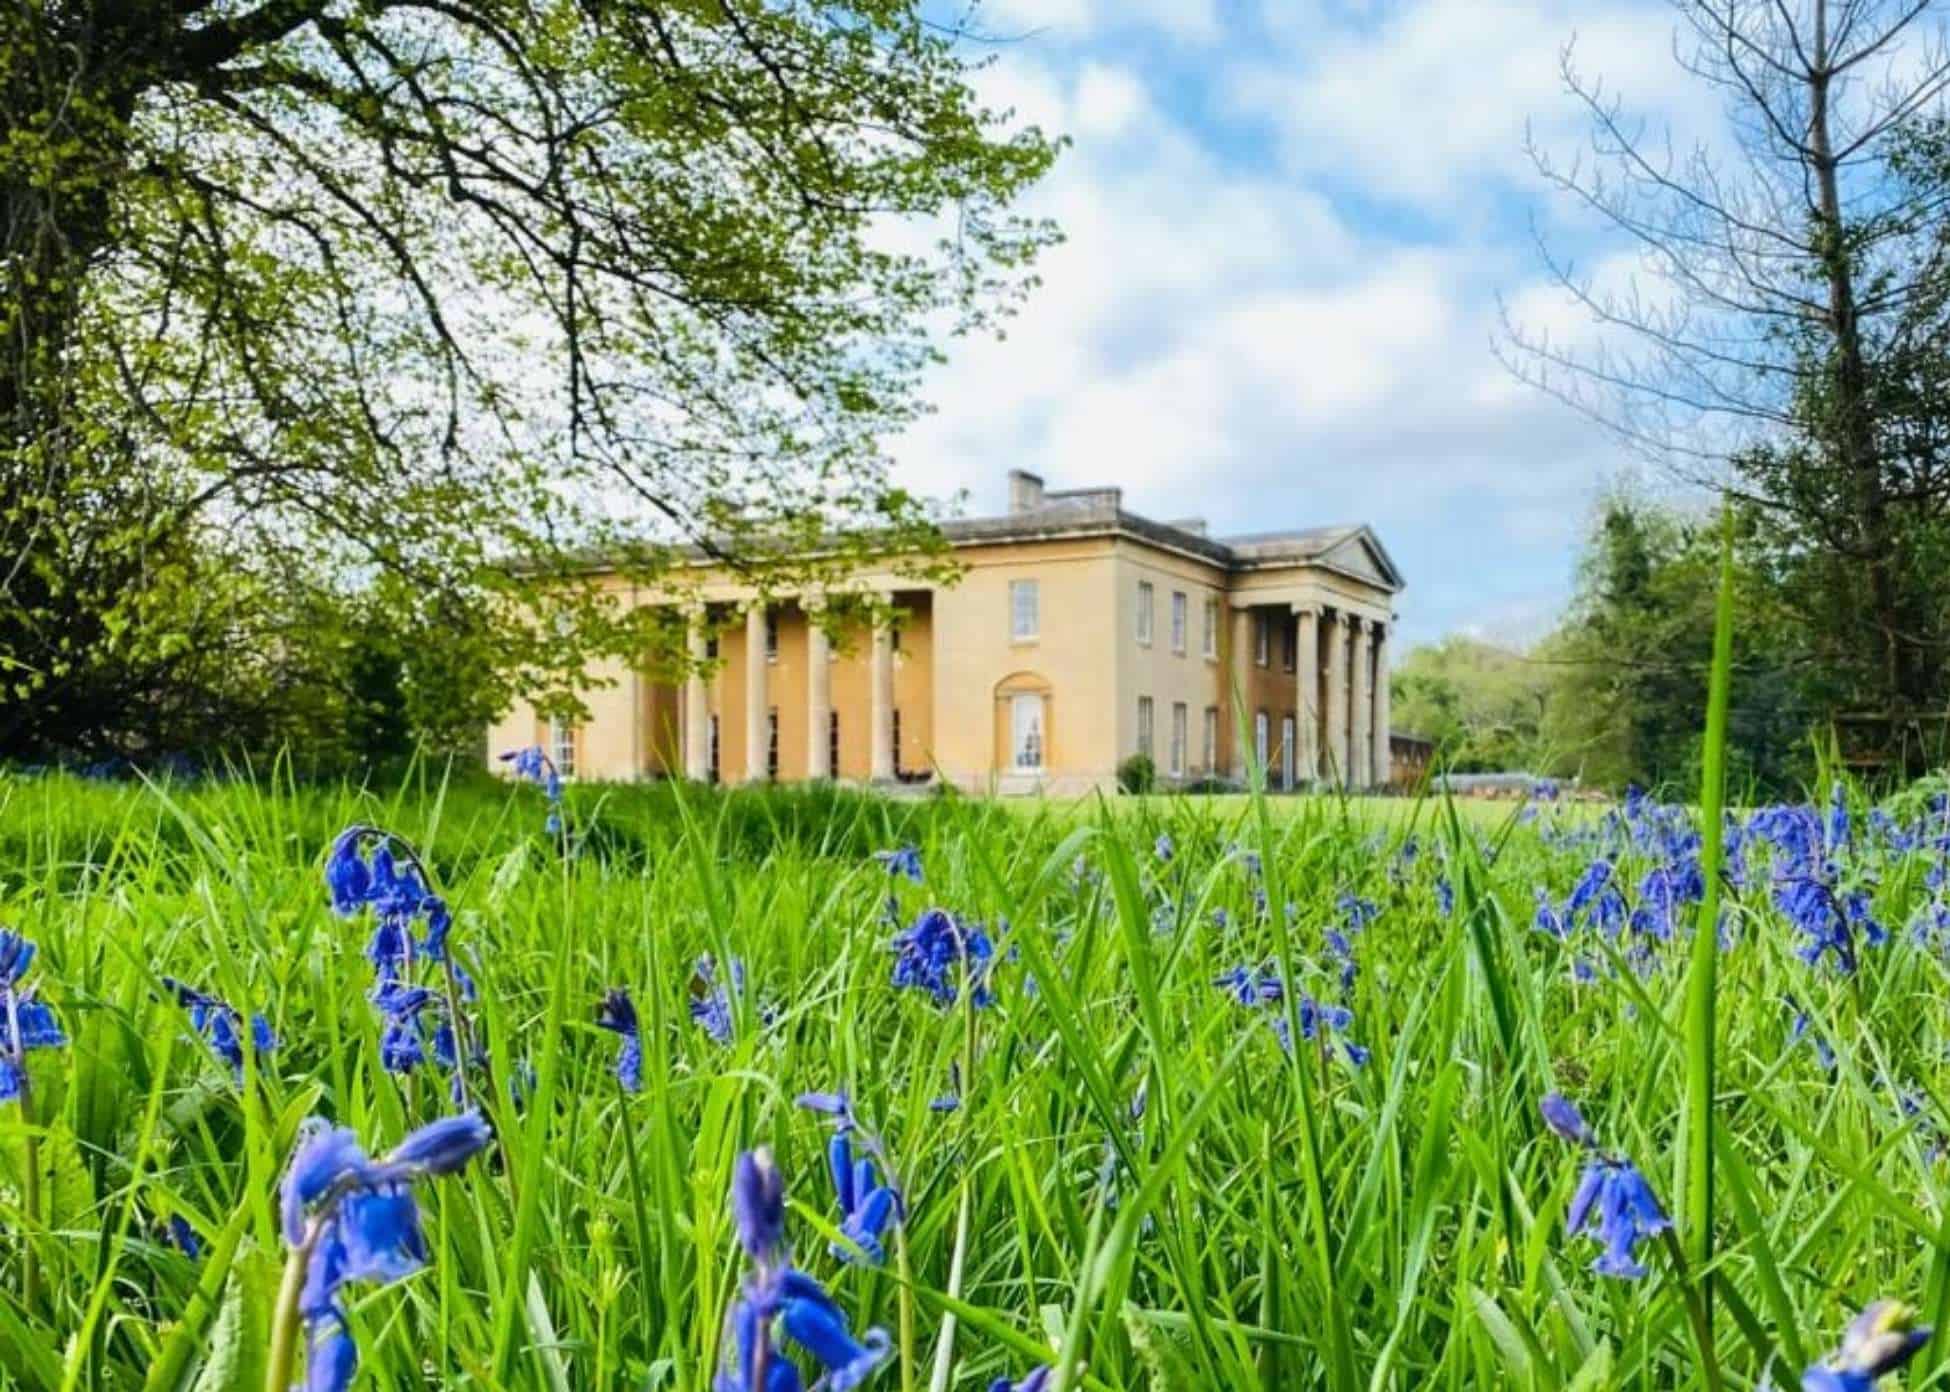 Leigh Court, a stately home, with bluebells and grass in the foreground